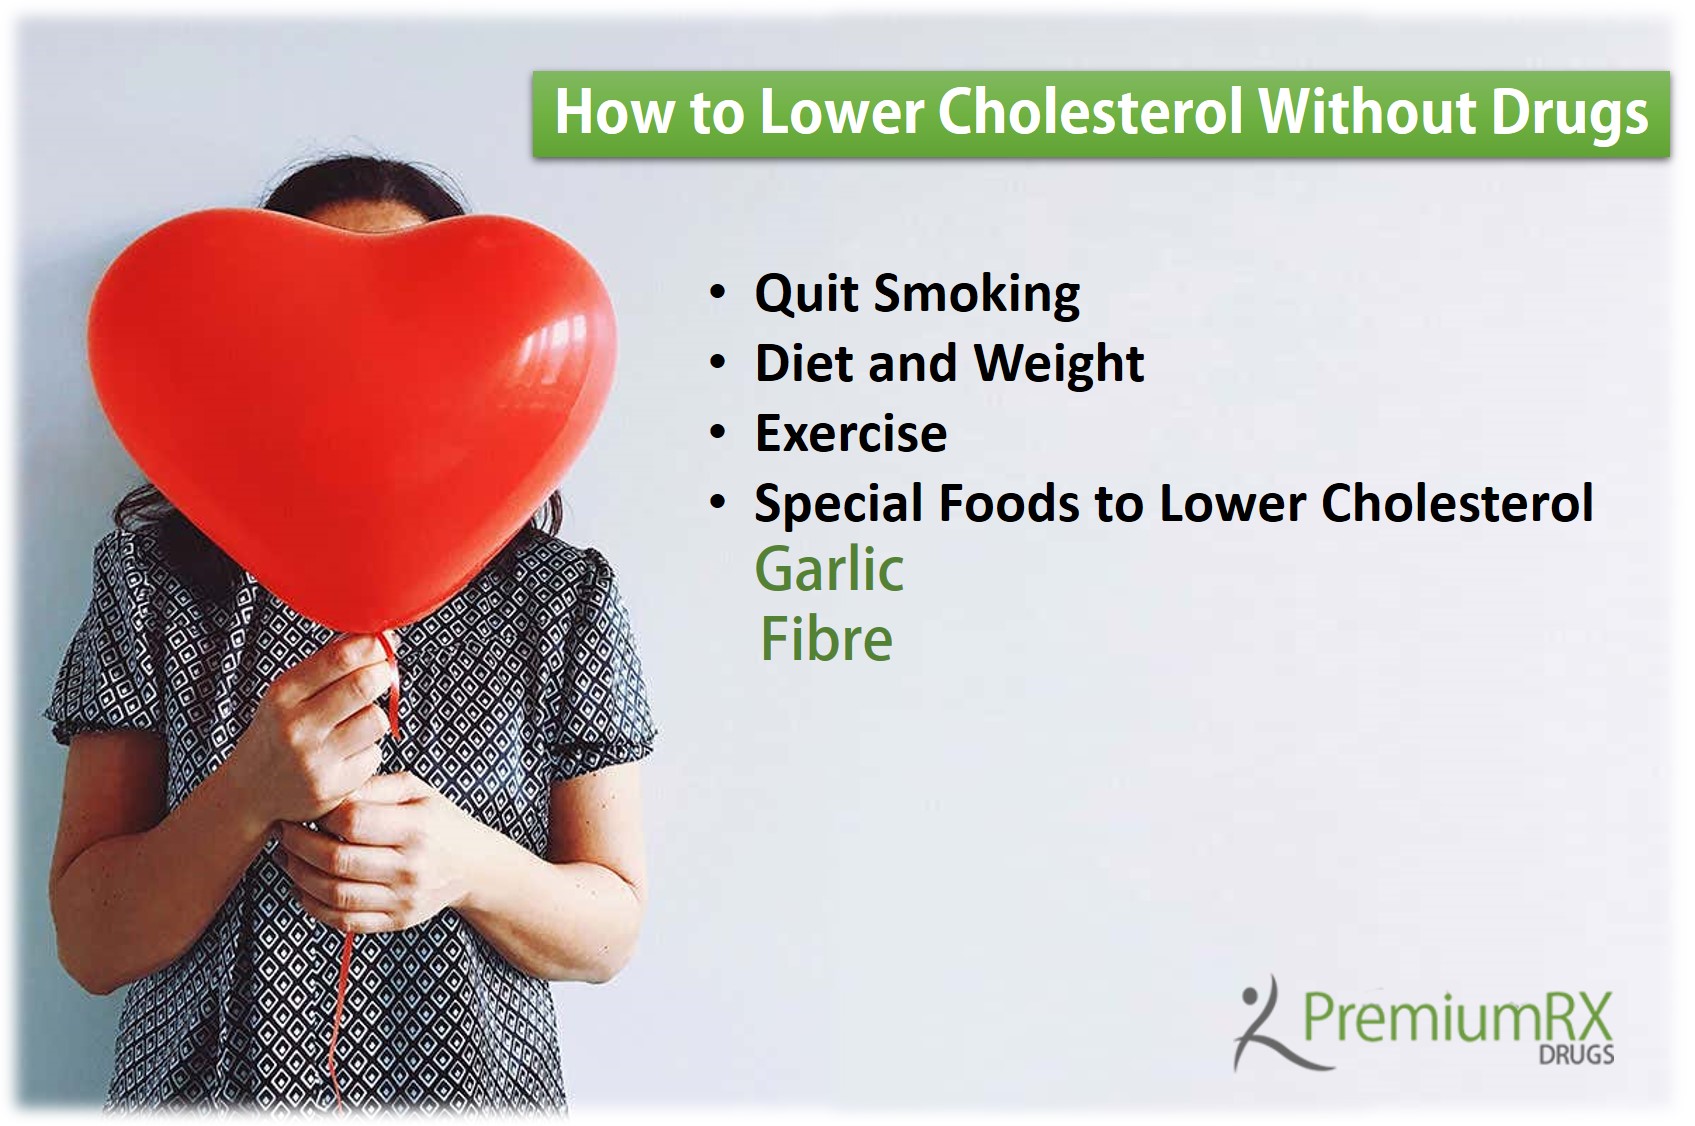 How to Lower Cholesterol Without Drugs